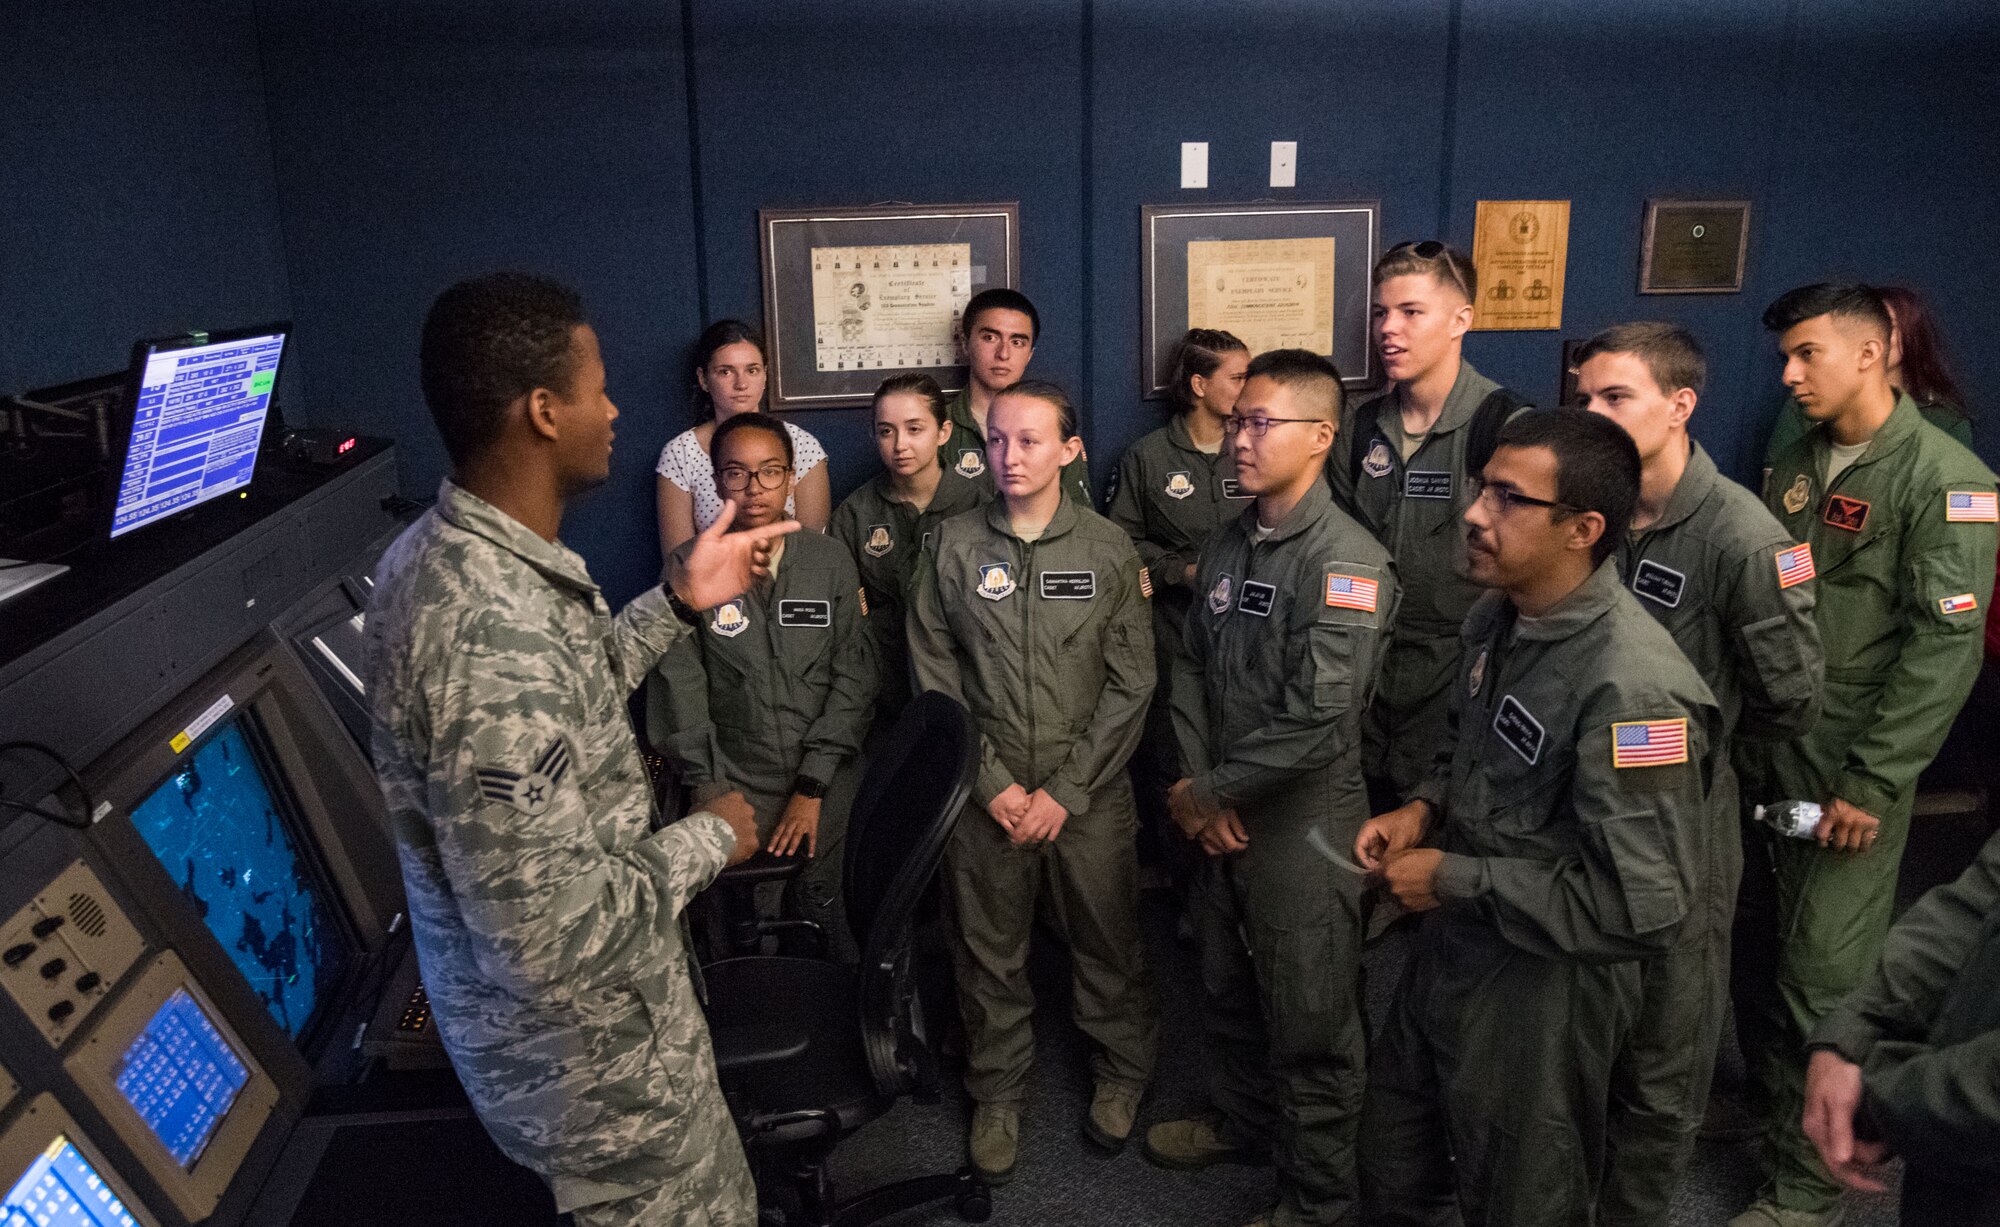 Senior Airman Kristapher Guillen, 436th Operations Support Squadron Radar Approach Control air traffic controller, answers questions from Air Force Junior Reserve Officers’ Training Corps cadets during a tour of the RAPCON facility and control tower July 23, 2019, at Dover Air Force Base, Del. Cadets who attended the AFJROTC Summer Flight Academy at Delaware State University spent half of the day touring aviation-related facilities and aircraft. (U.S. Air Force photo by Roland Balik)